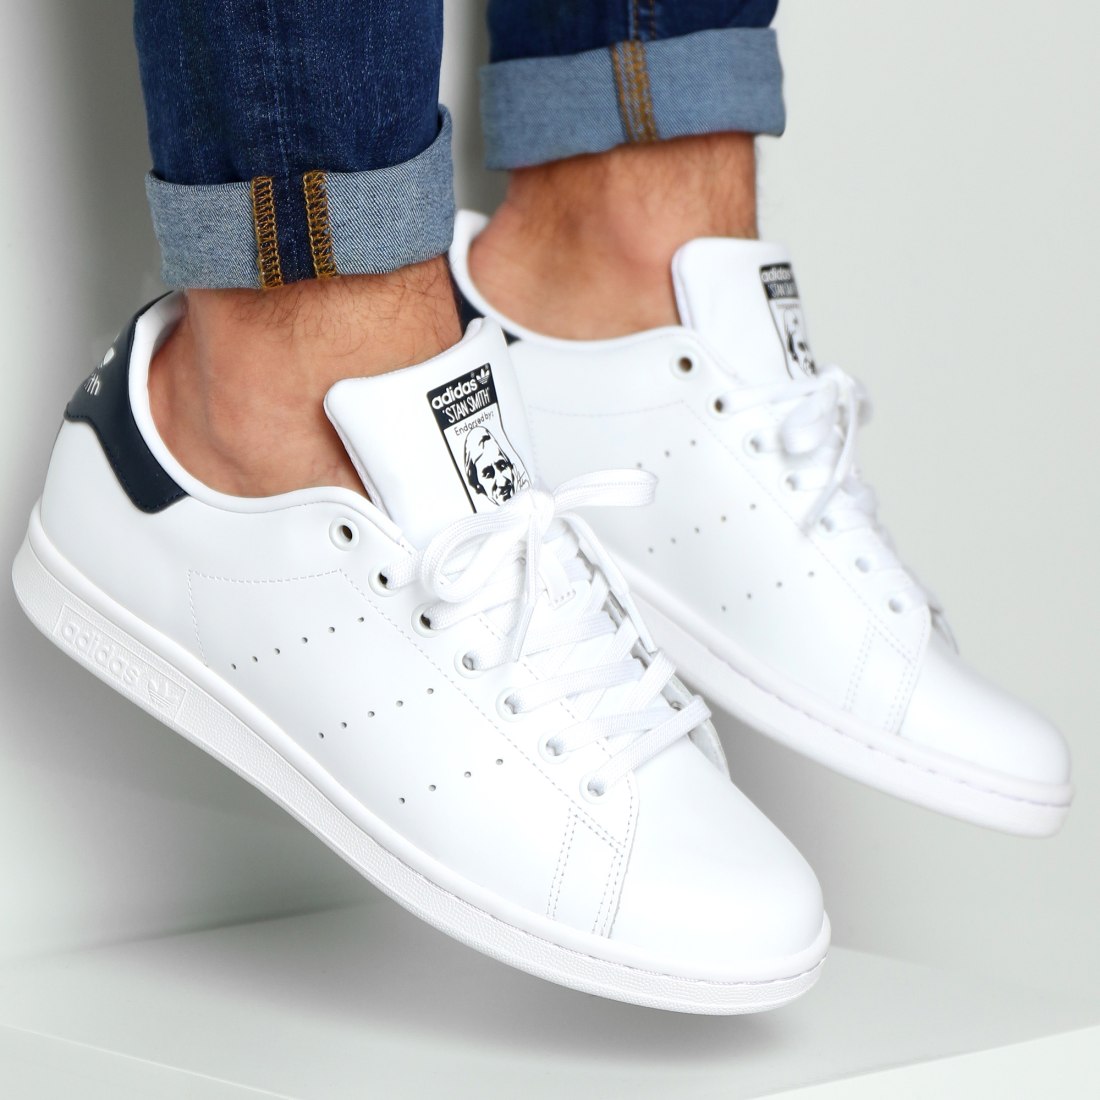 stan smith new collection